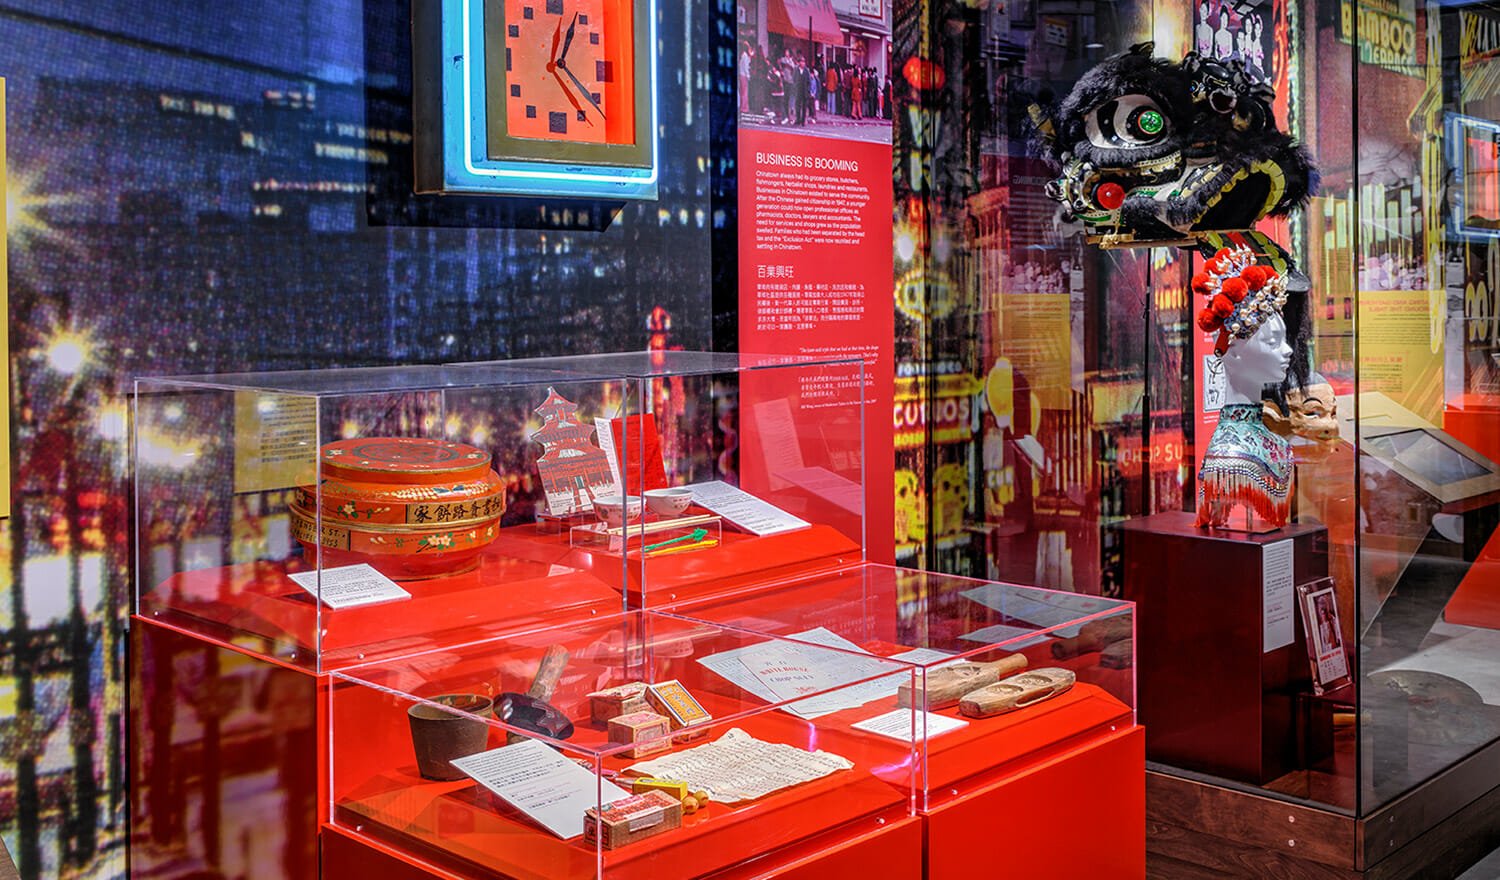 Image of a display inside the Chinatown Storytelling Centre.